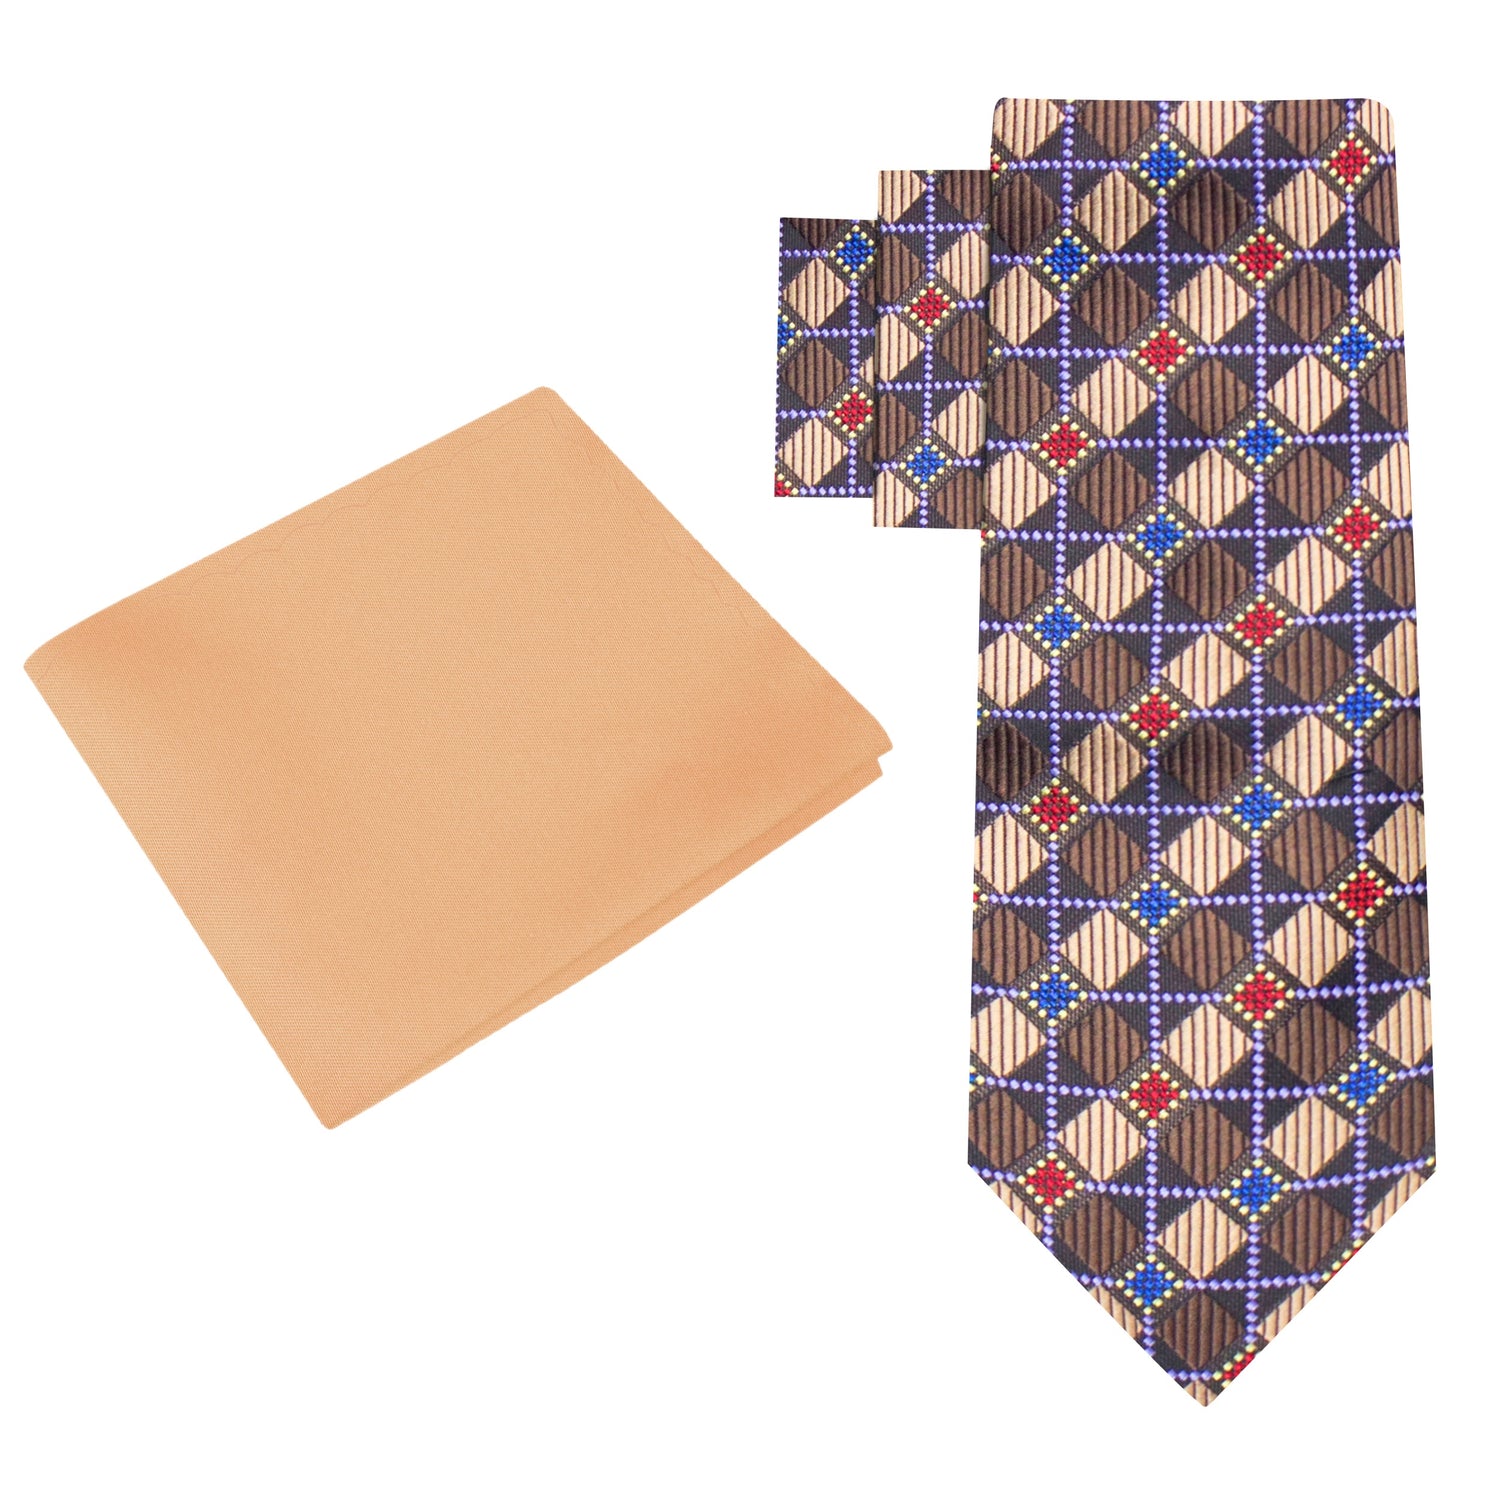 Alt View: Brown, Red, Blue and Light Purple Geometric Silk Necktie and Light Brown Square